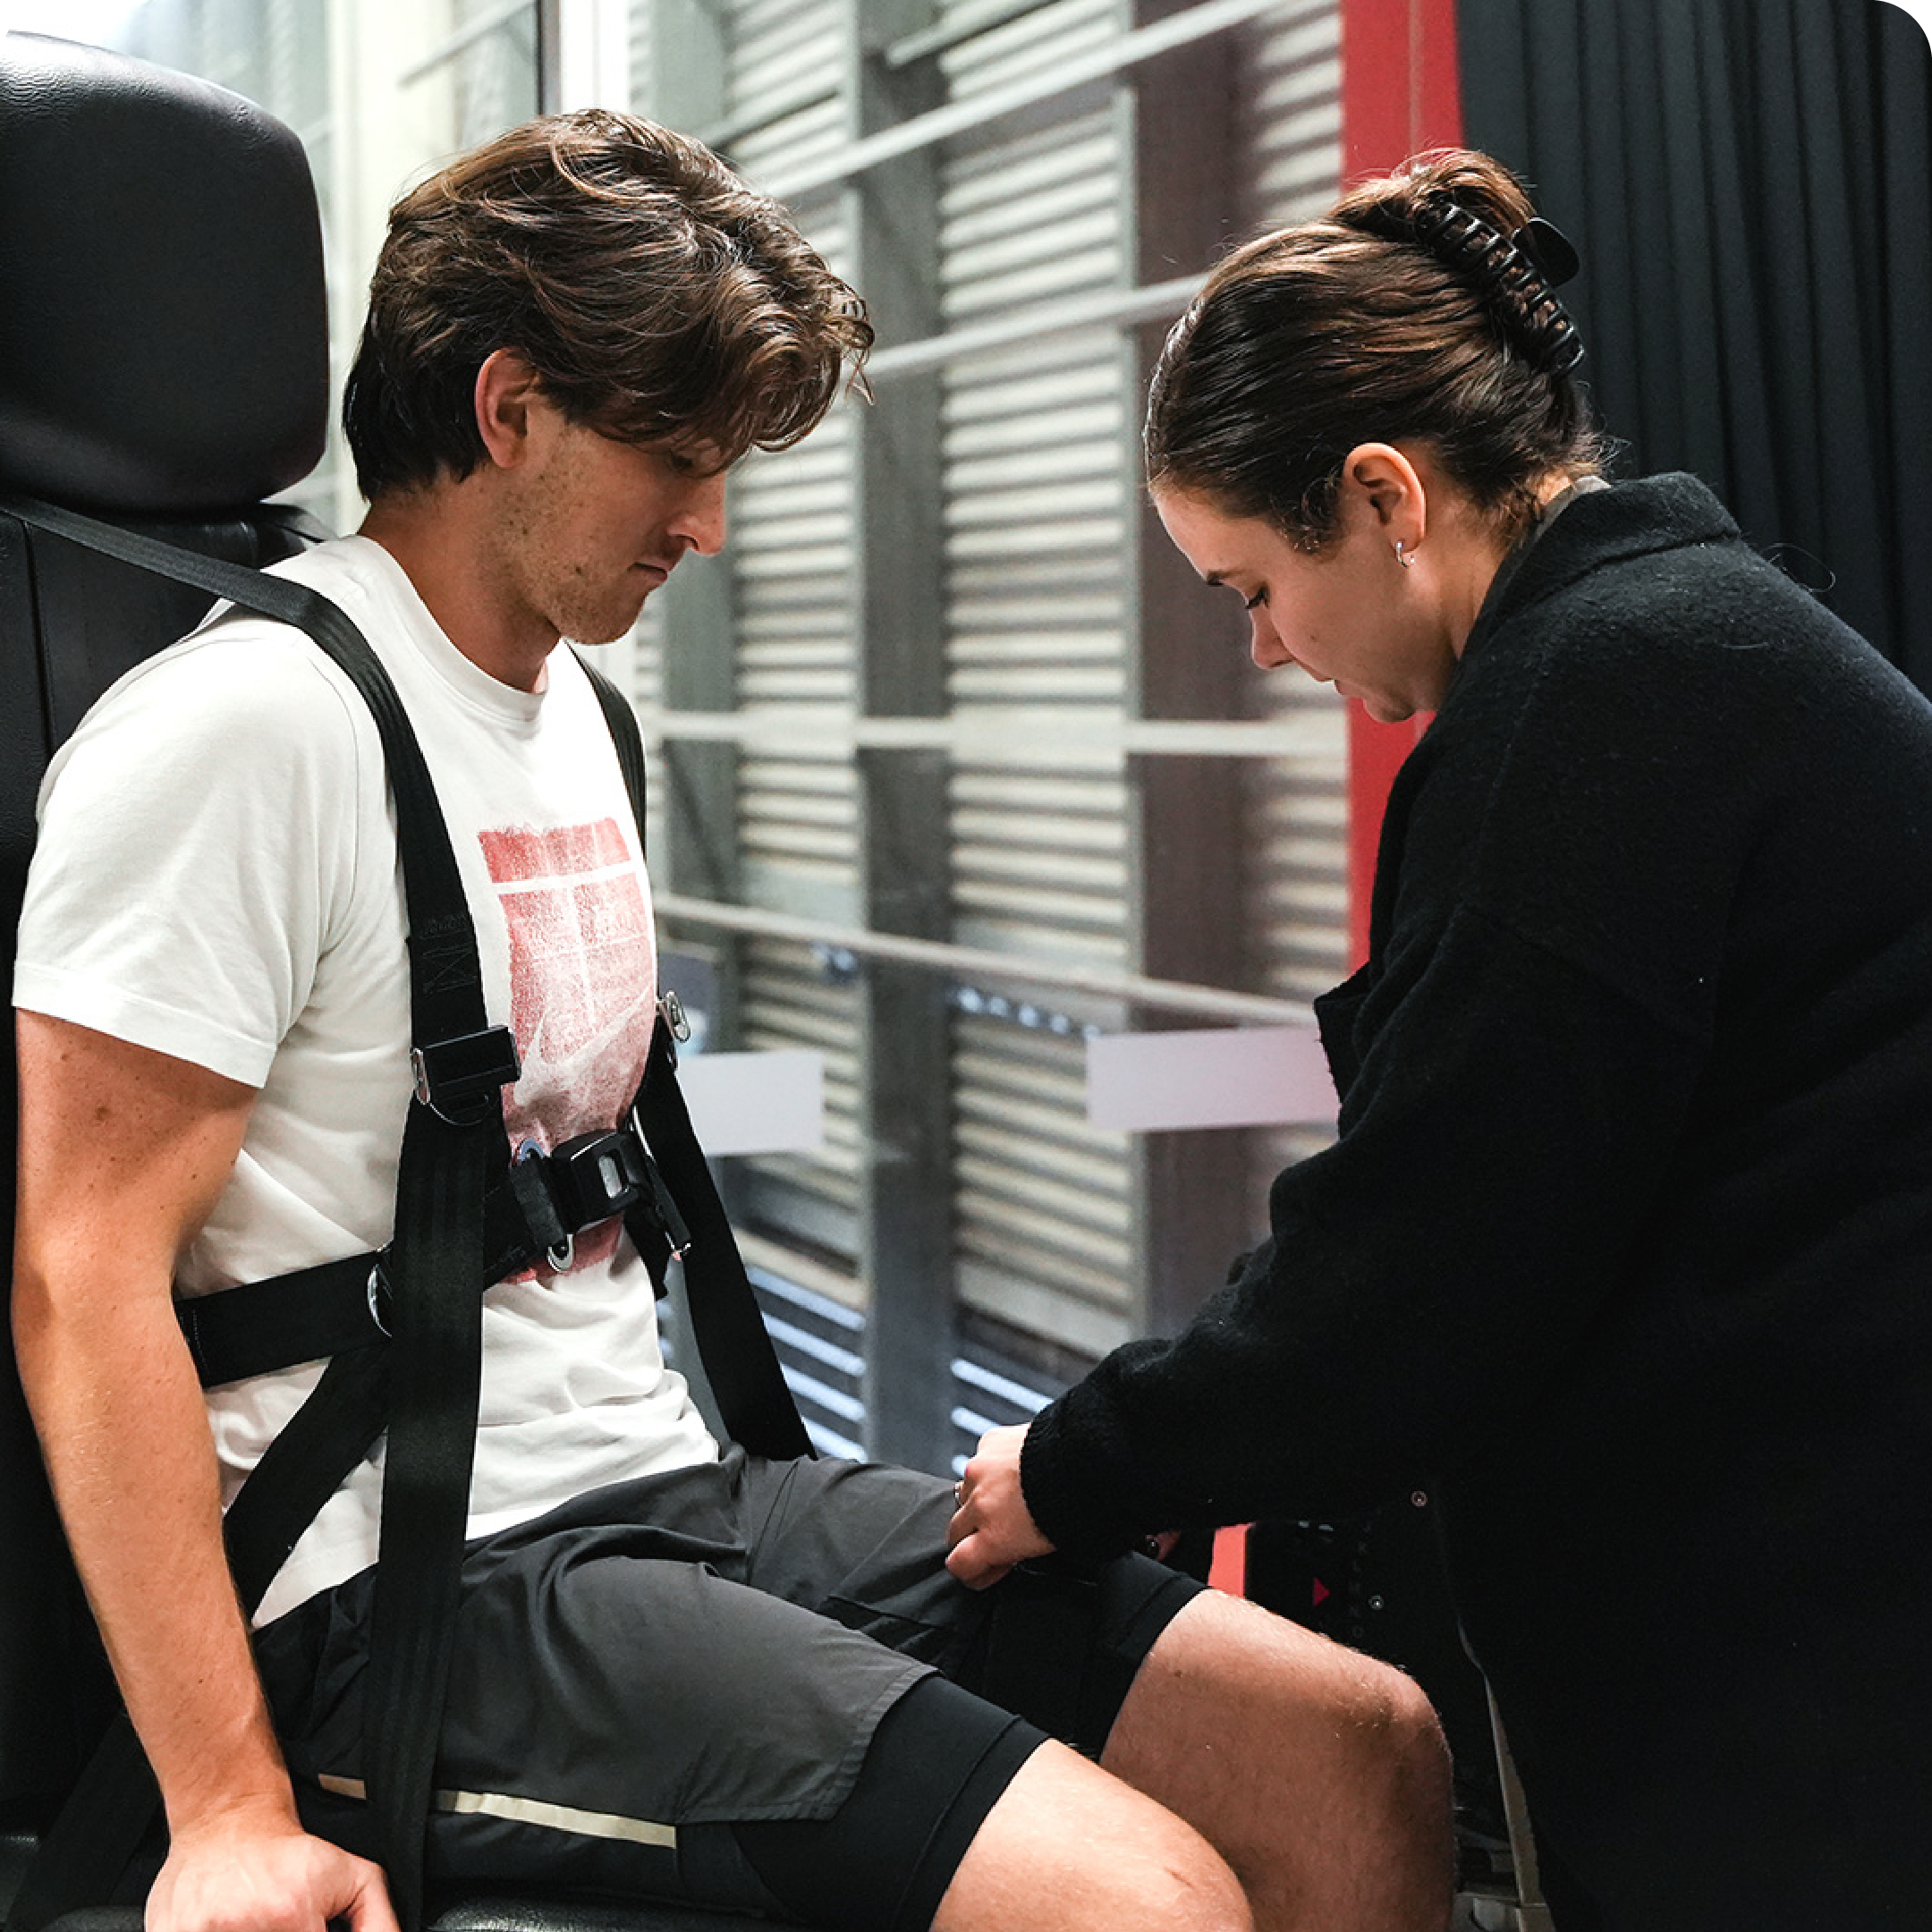 Myovolt vibration therapy leg brace being tested on hamstring muscles in new PhD research of acute effects of localized vibration therapy on neuromuscular performance on athletes. 